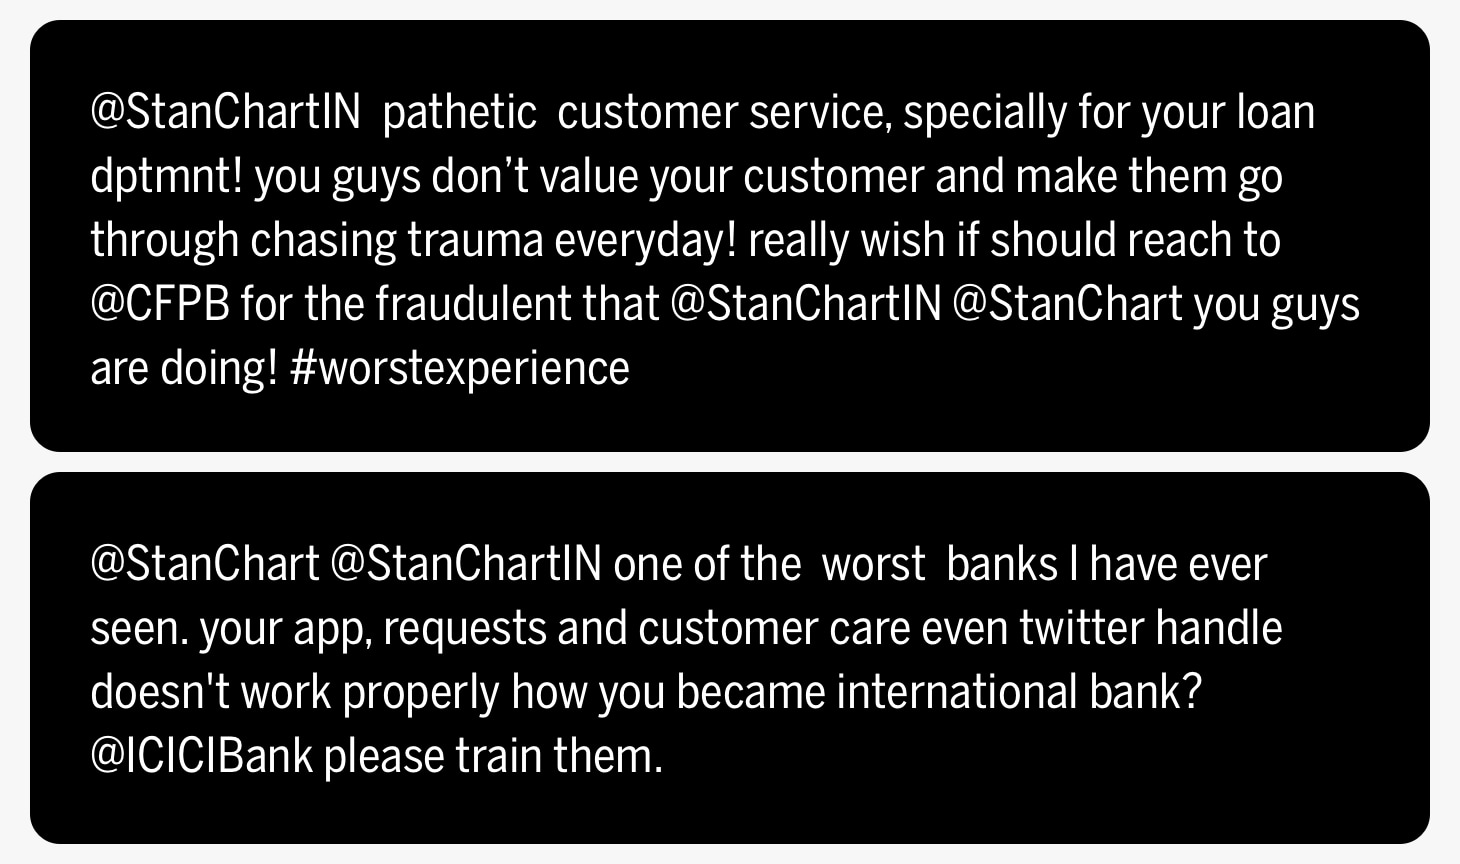 Tweets about poor customer service